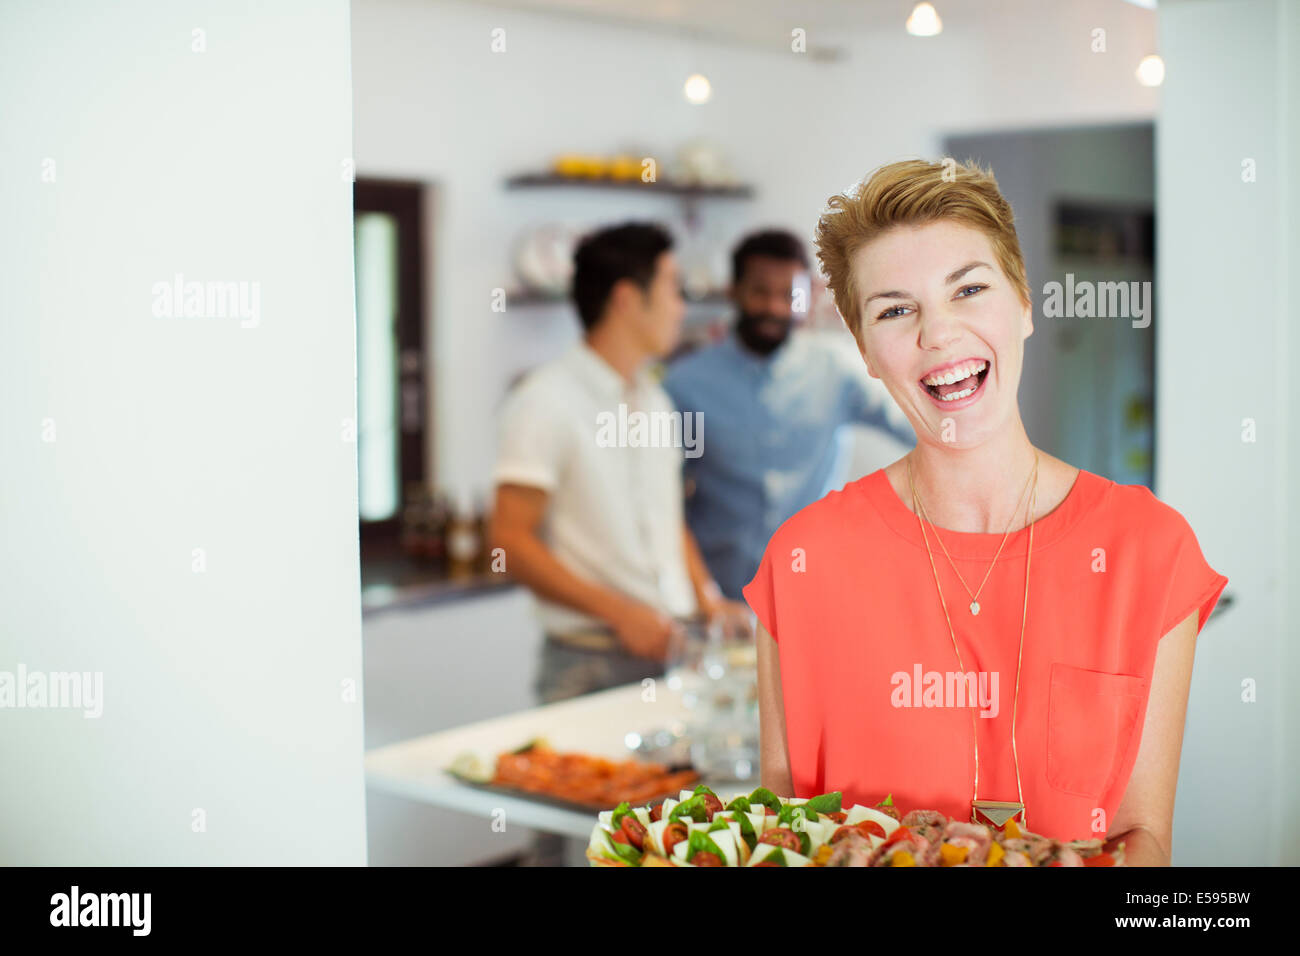 Woman carrying tray of food at party Stock Photo